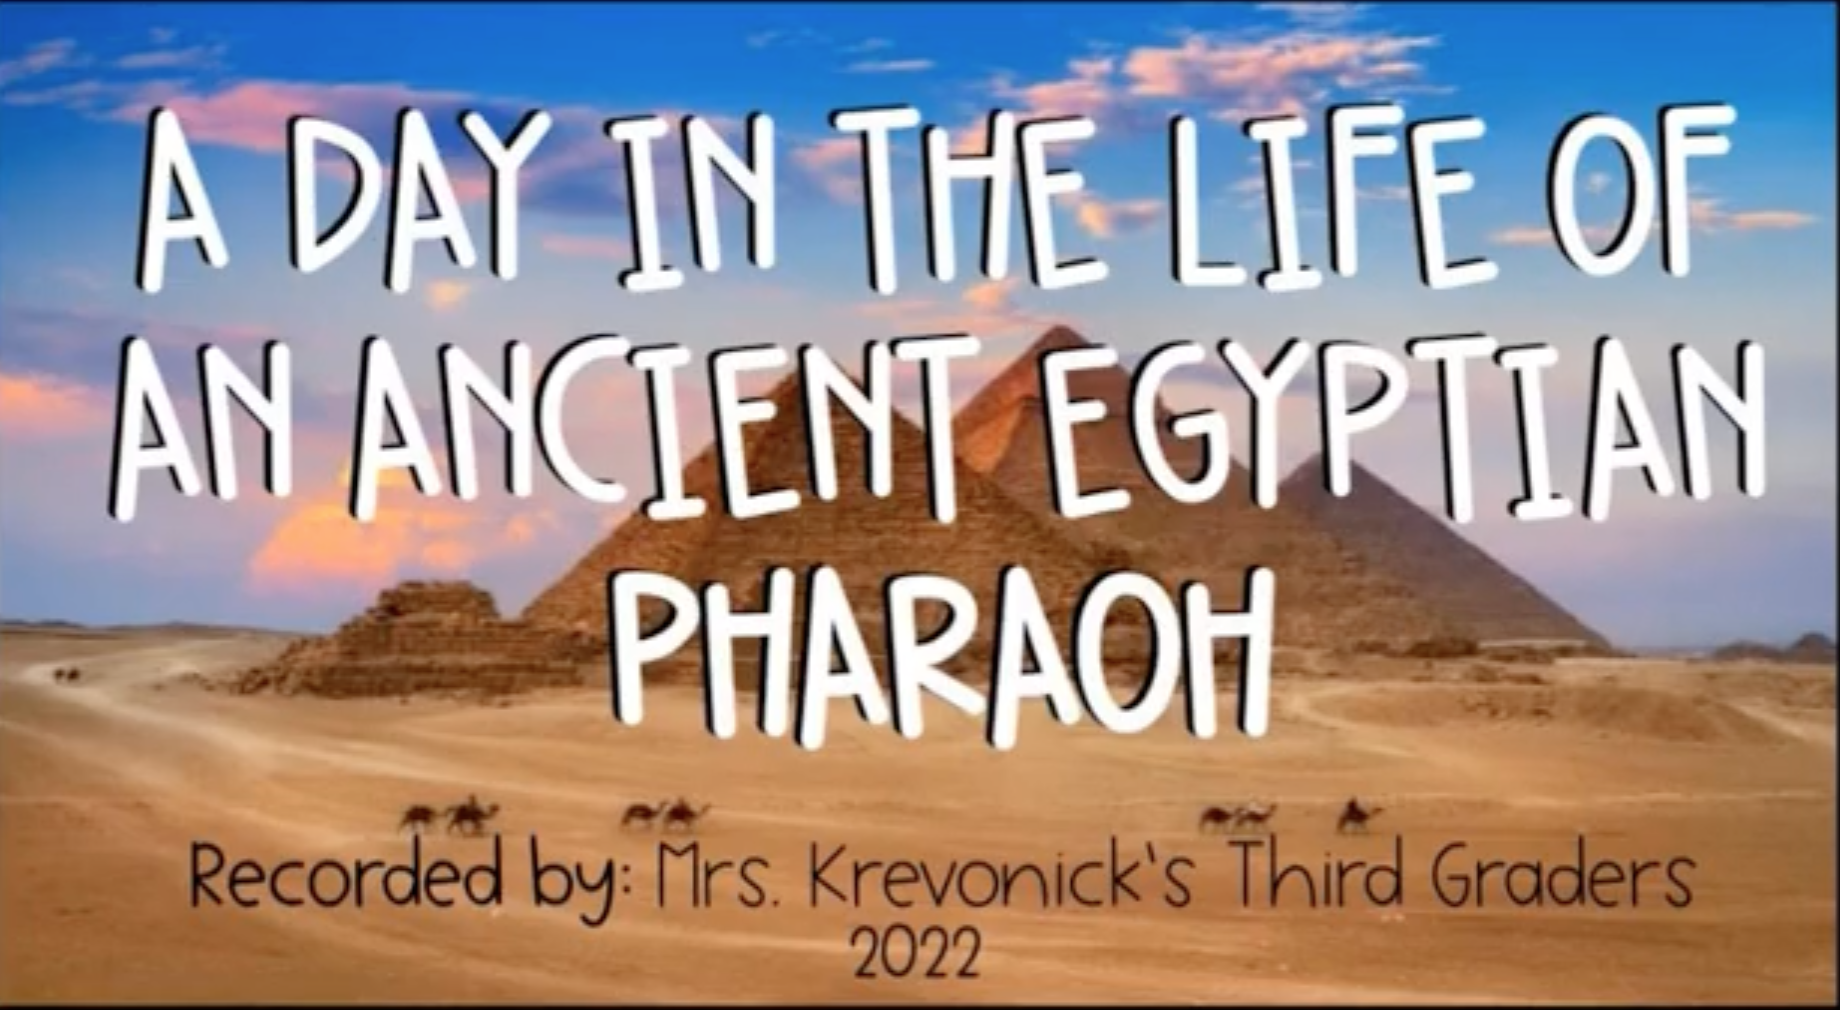 A Day in the Life of an Egyptian Pharaoh